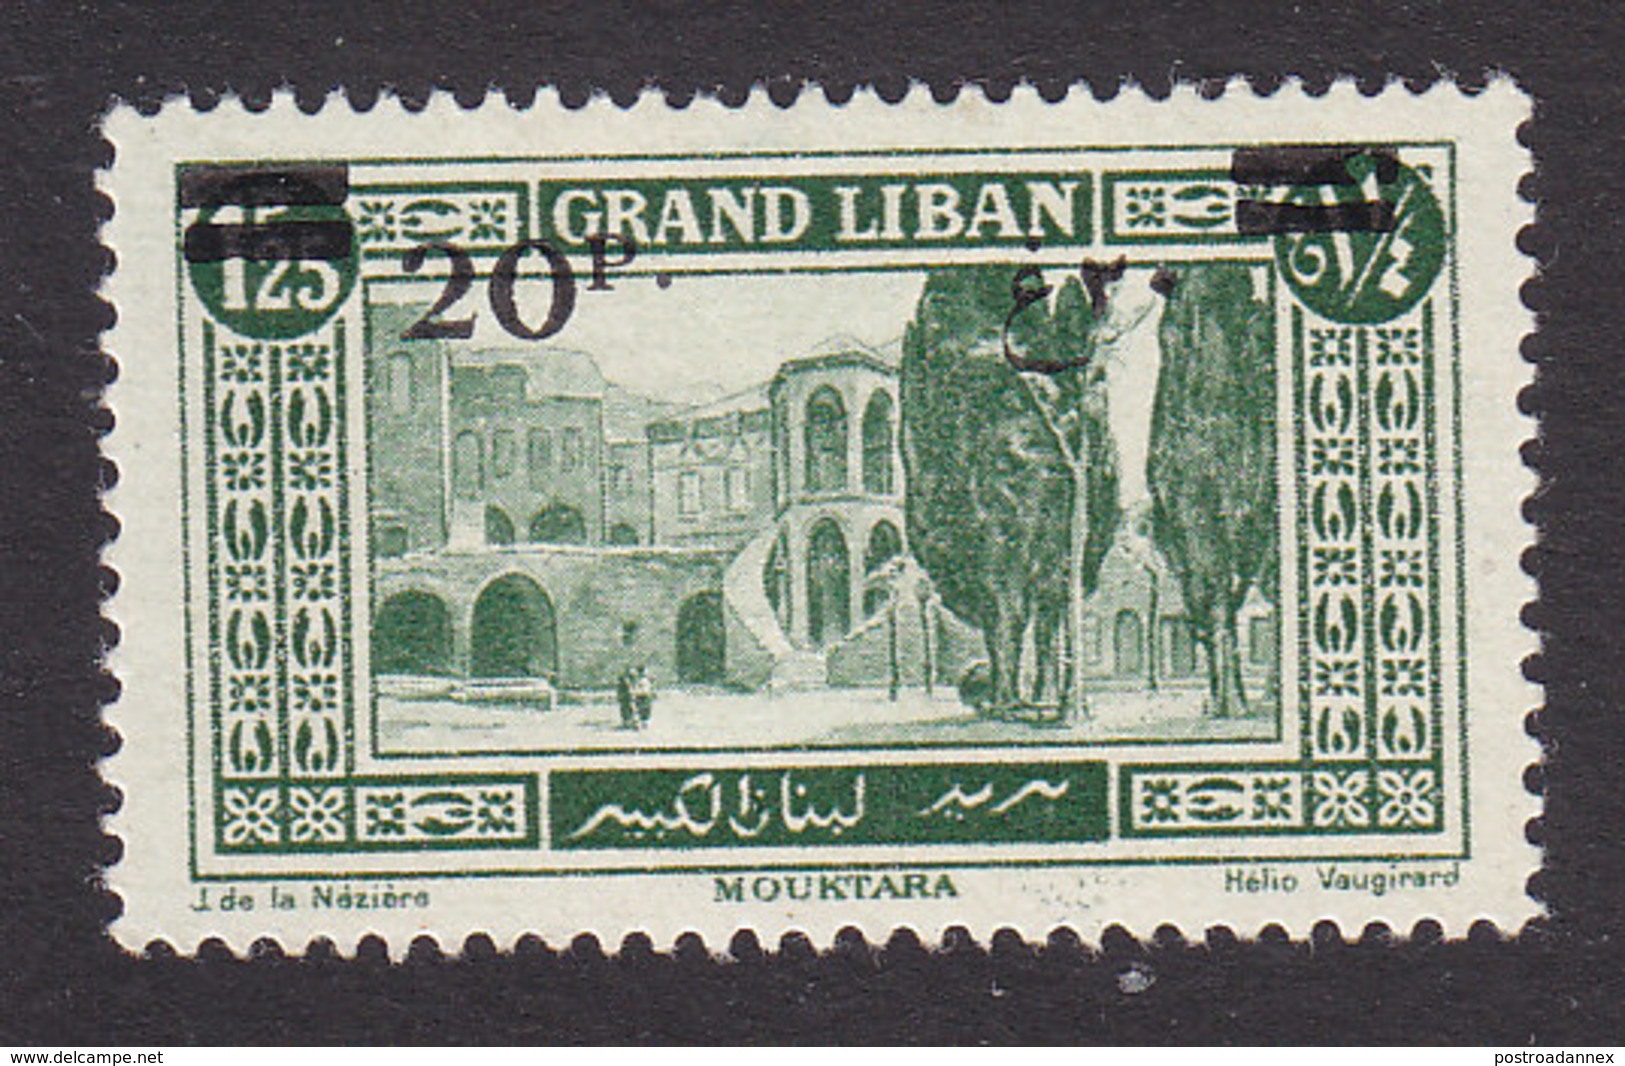 Lebanon, Scott #67, Mint Hinged, Scenes Of Lebanon Surcharged, Issued 1926 - Unused Stamps